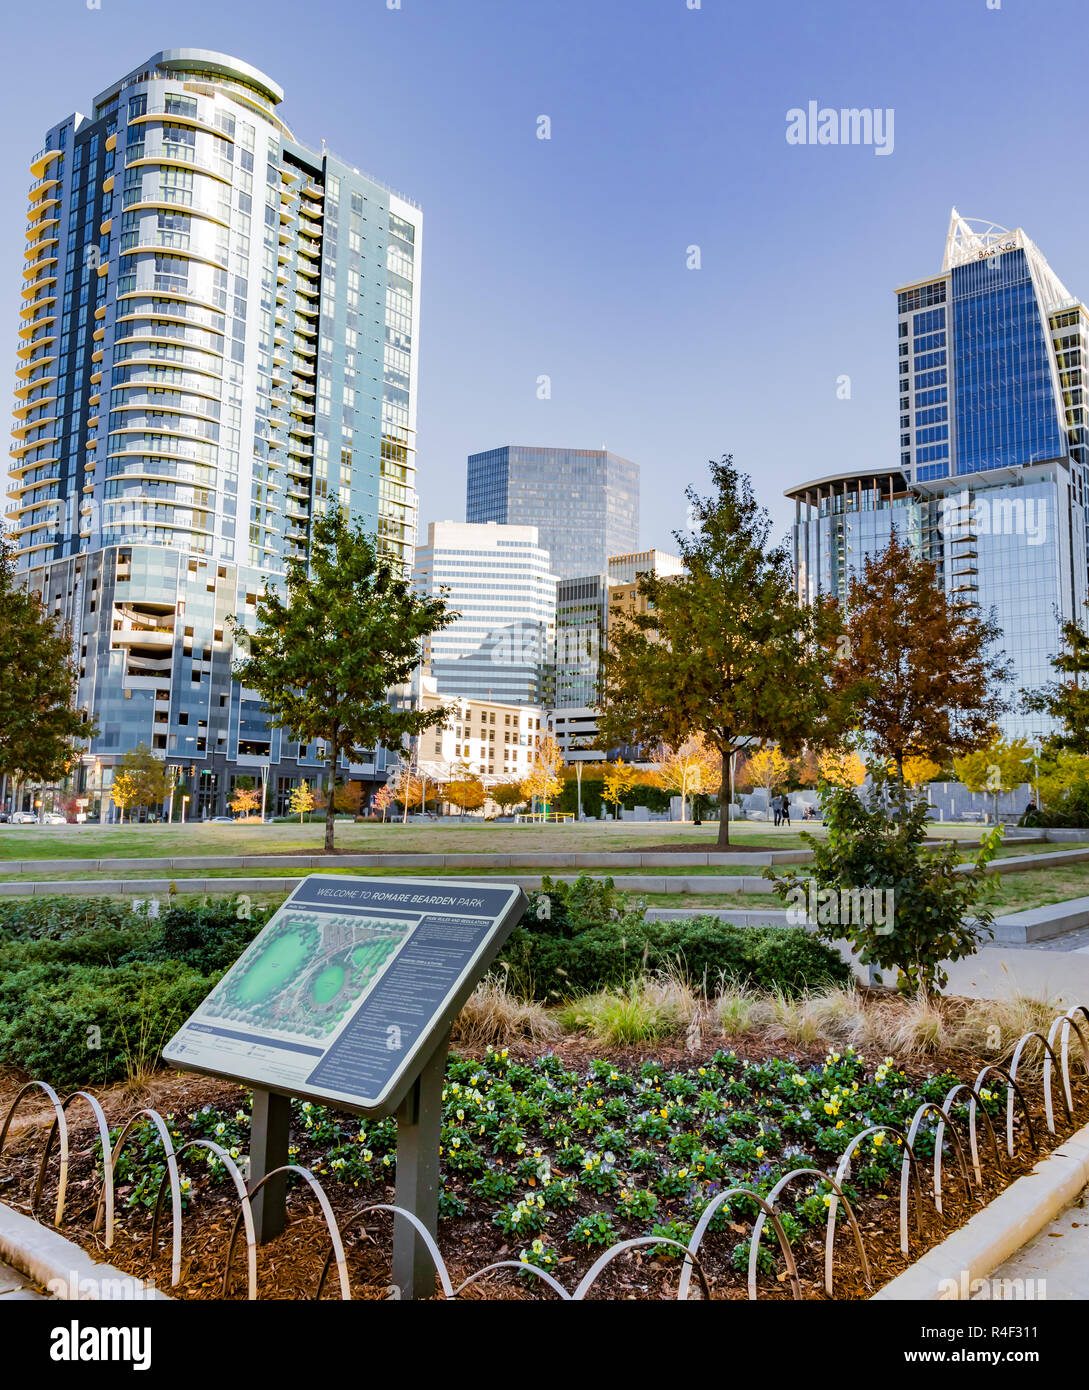 CHARLOTTE, NC, USA-11/21/18: Romare Bearden Park with skyscrapers in the background. Stock Photo